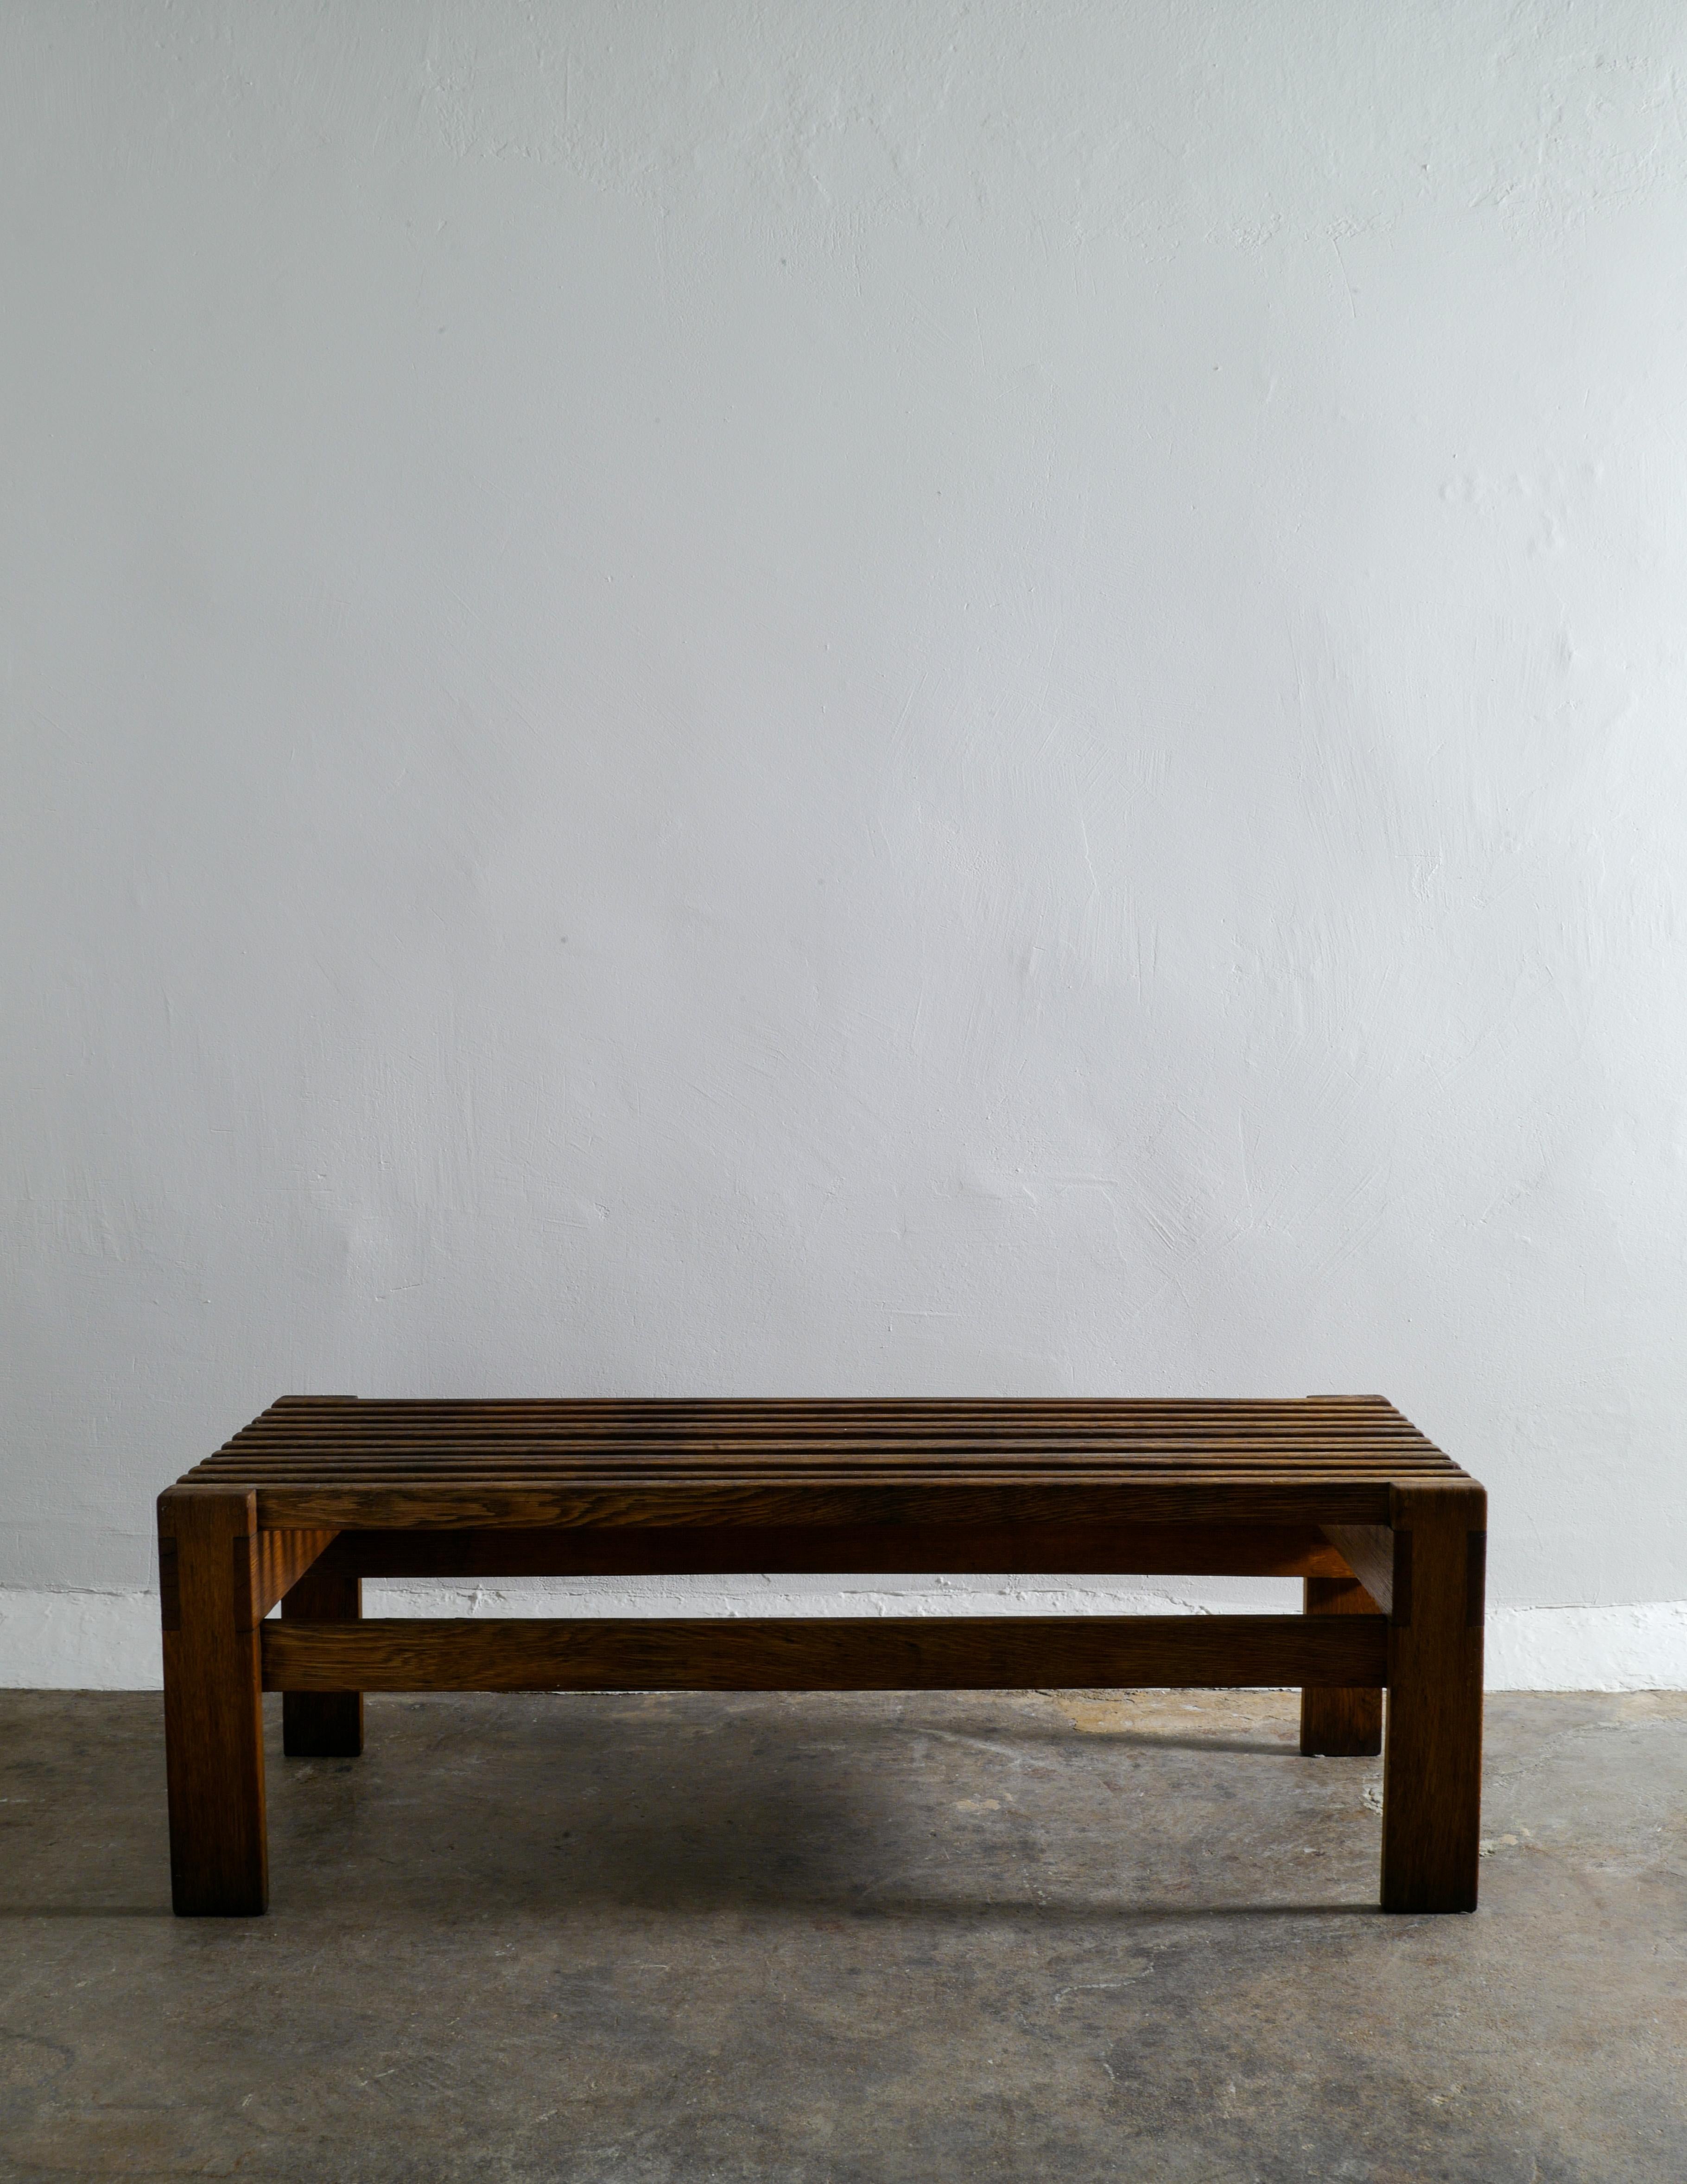 Rare Swedish bench by unknown designer in solid stained oak. In good vintage condition with some signs and patina from use.